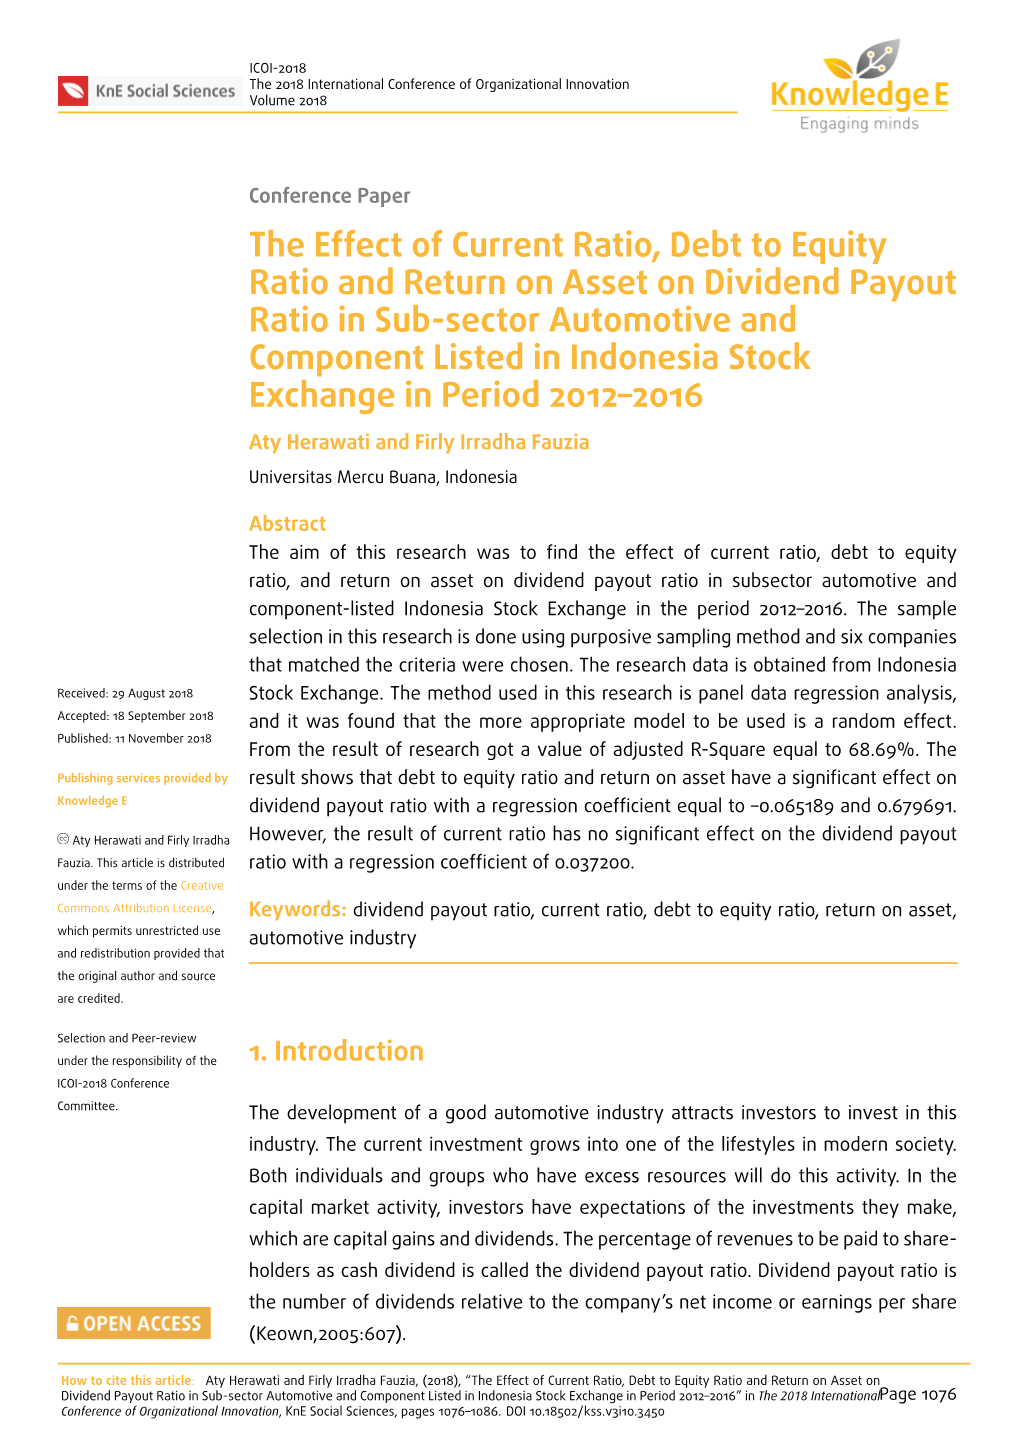 The Effect of Current Ratio, Debt to Equity